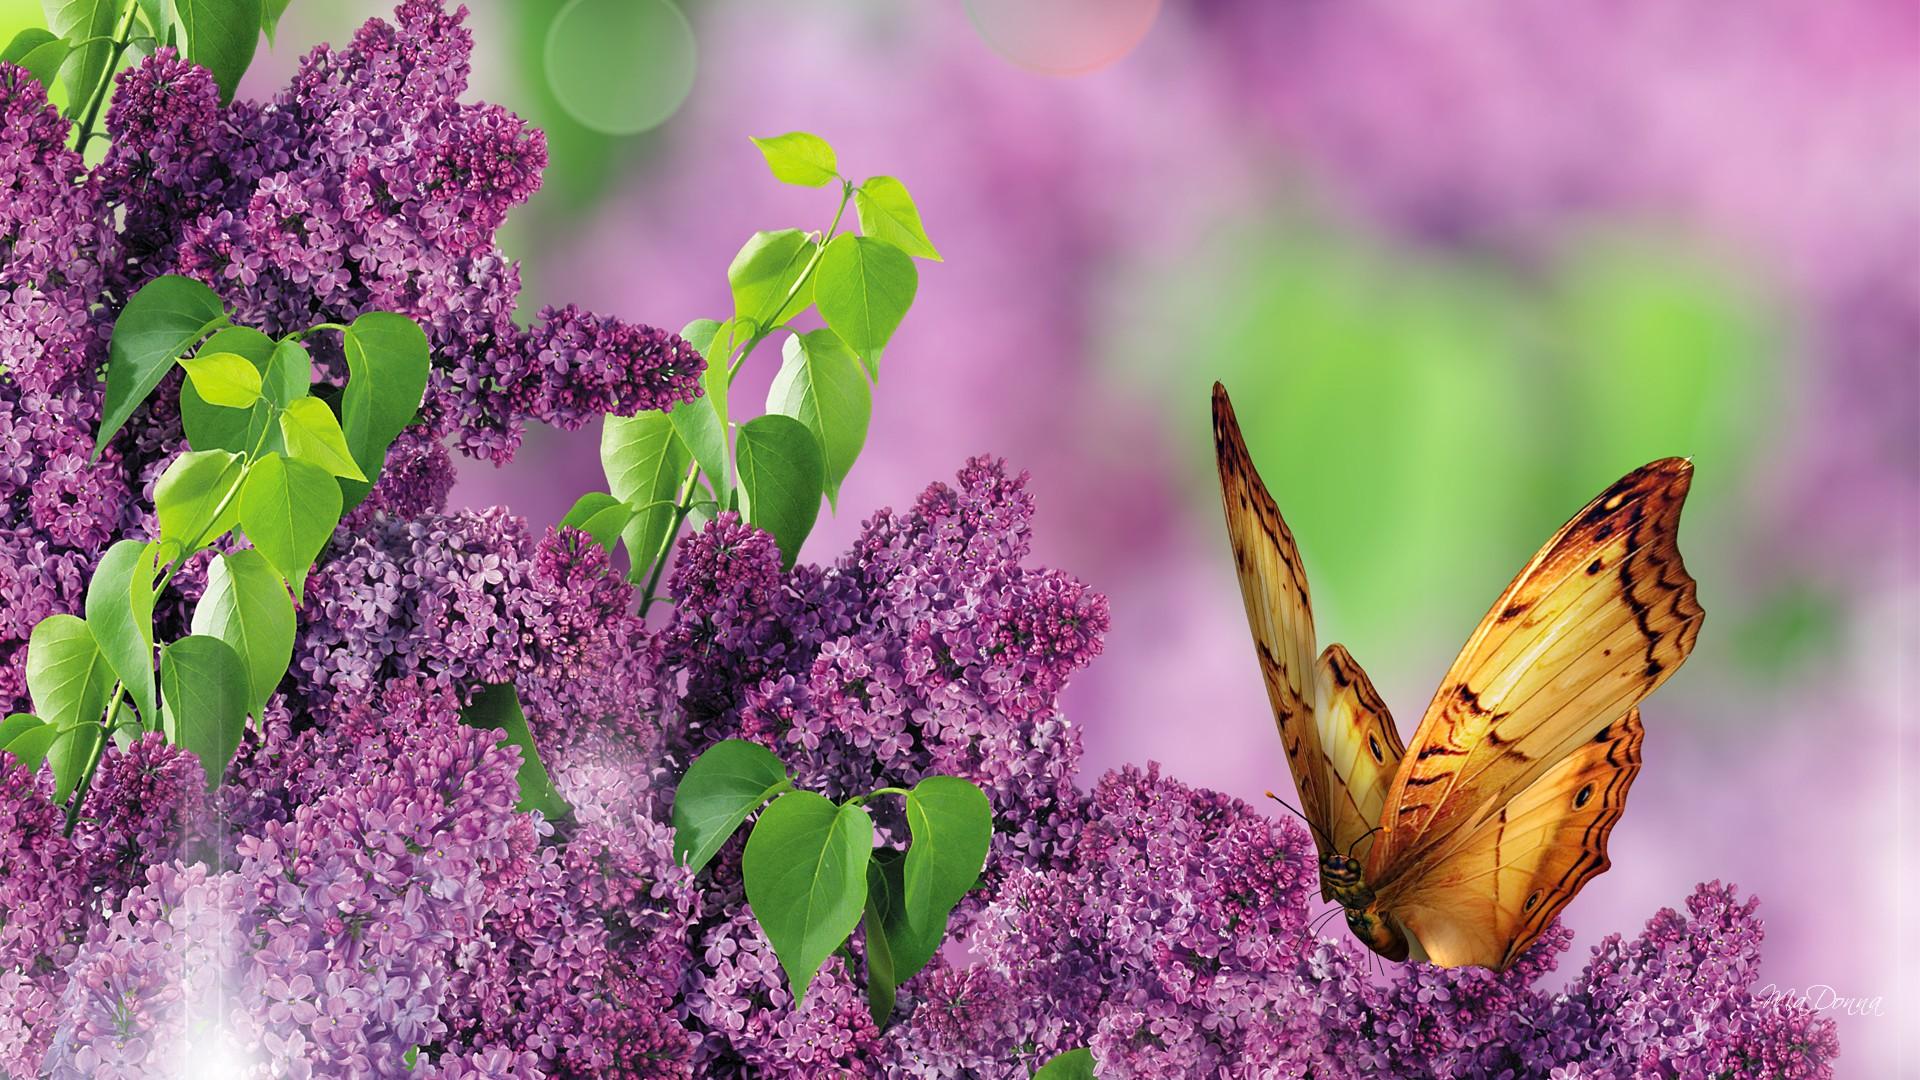 wallpaper theme image,lilac,flower,butterfly,insect,lilac